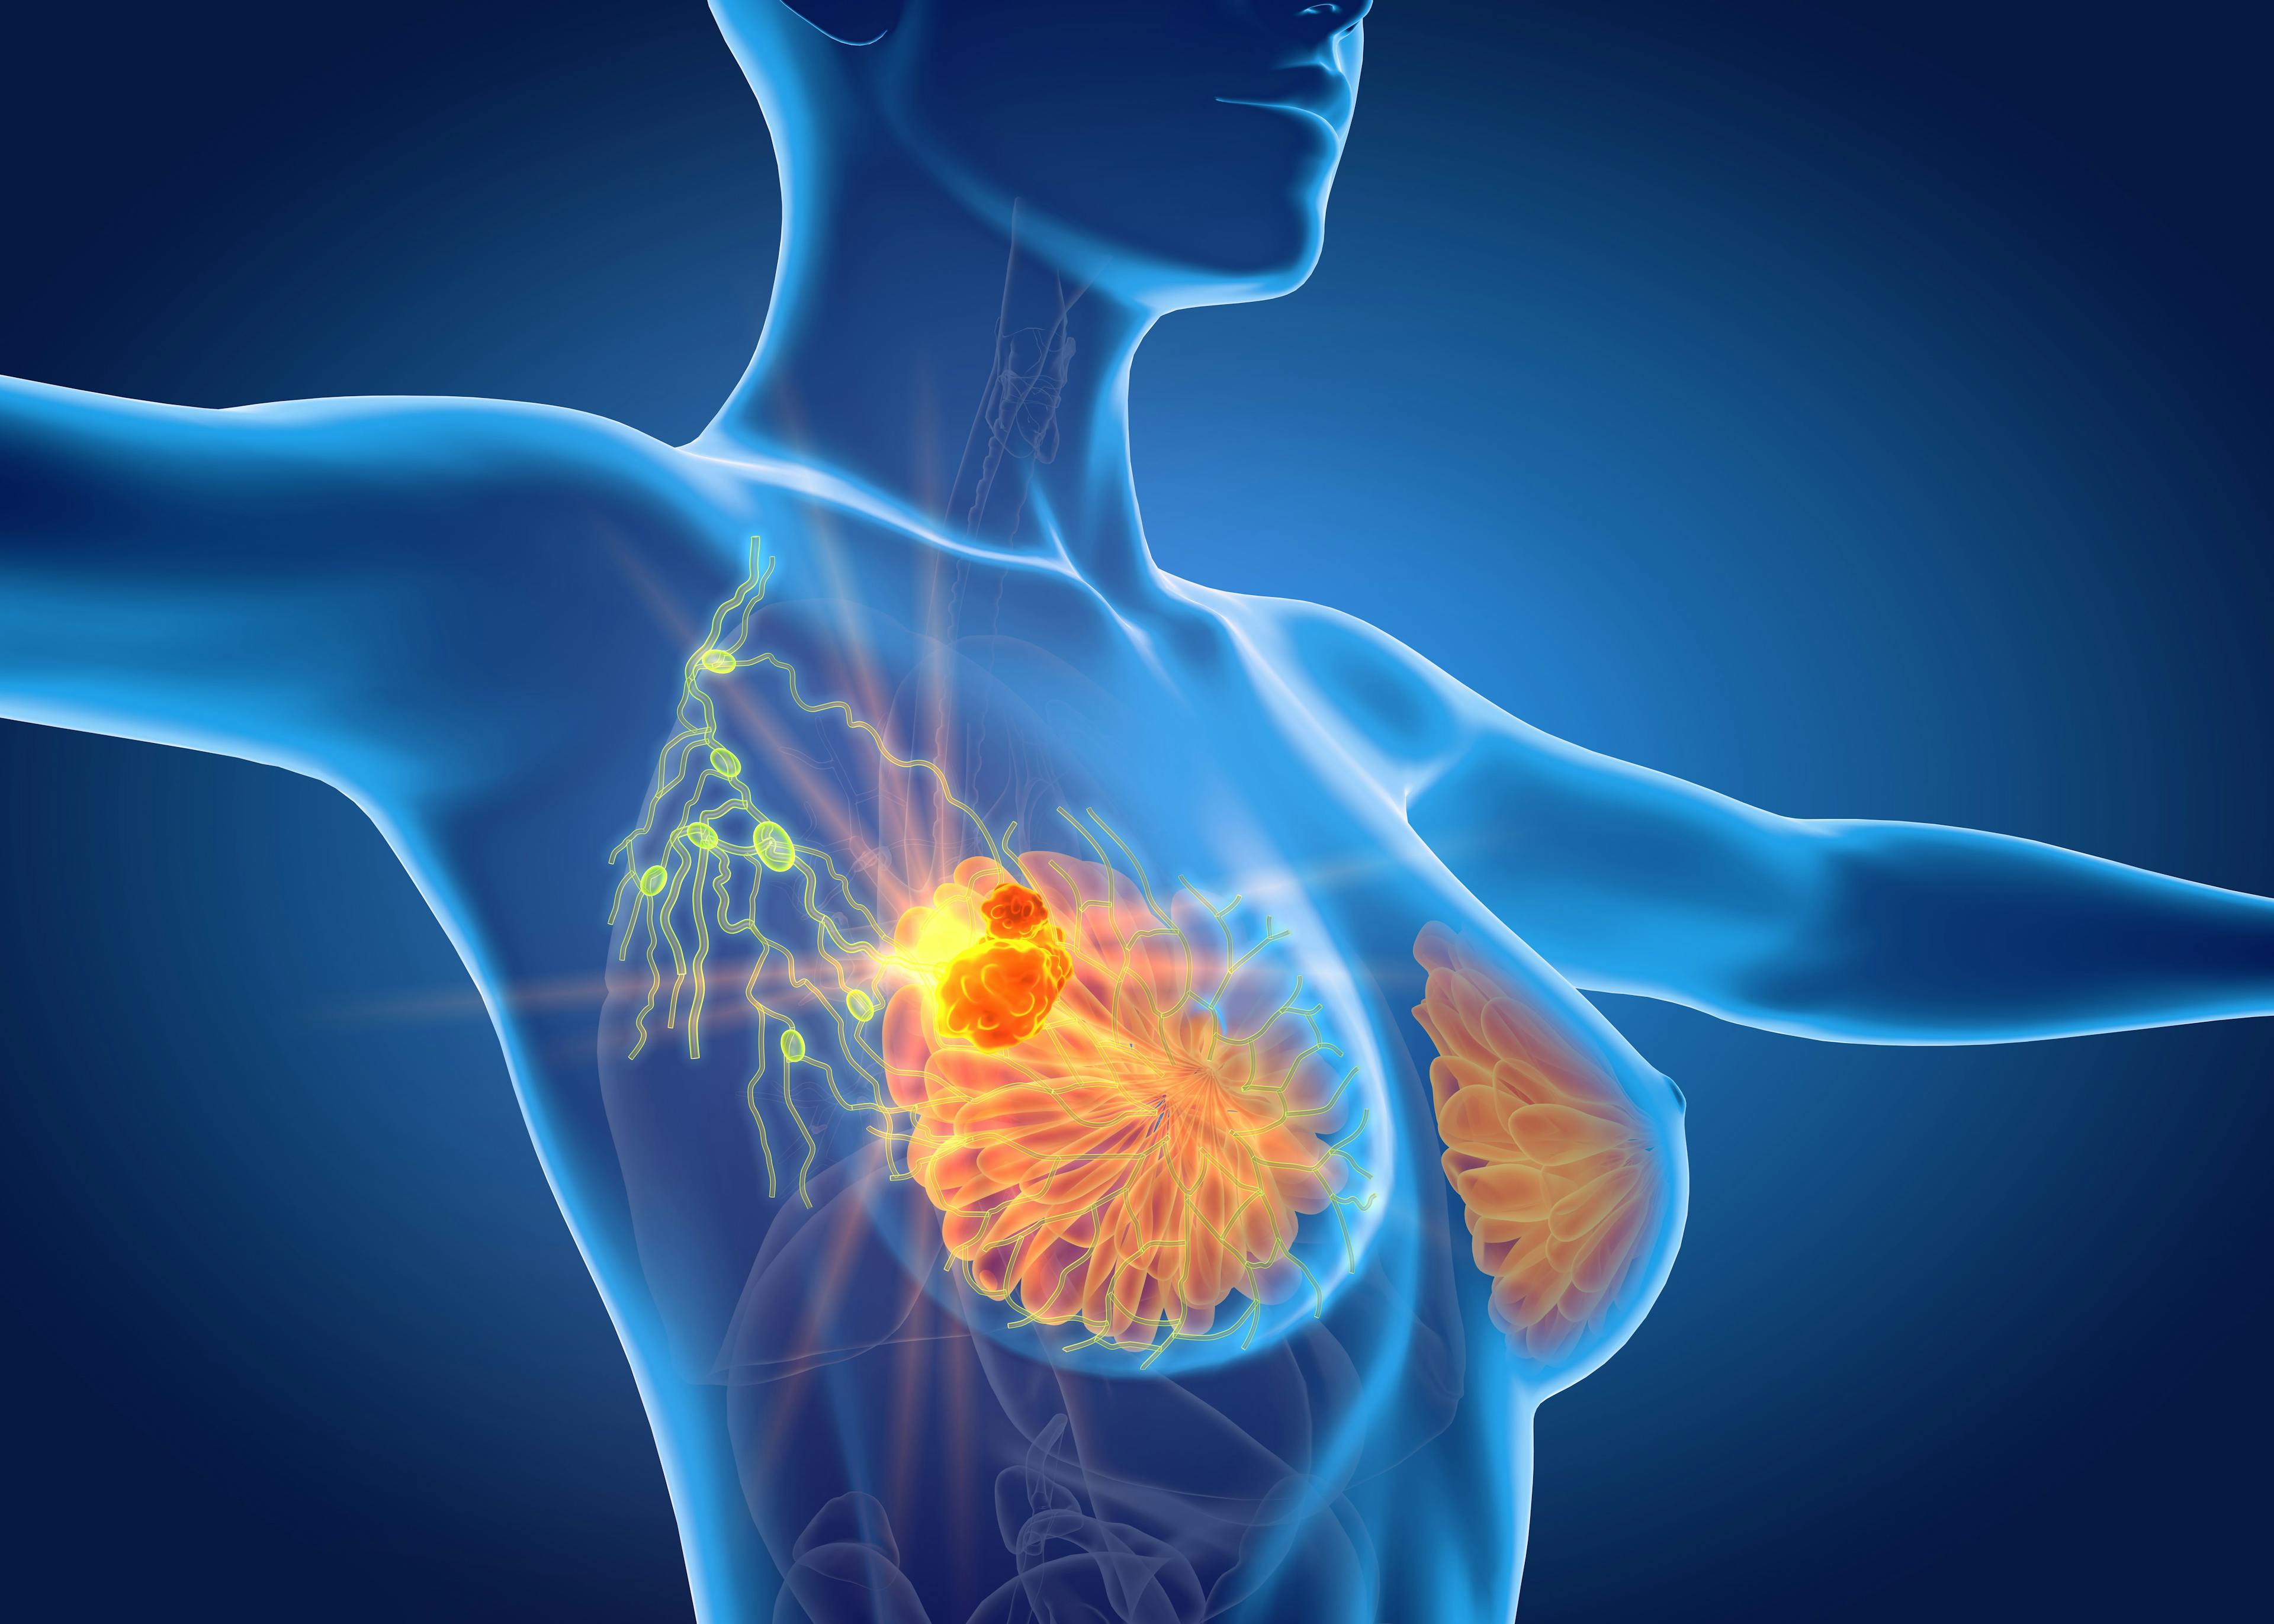 FDA Grants Priority Review to Sacituzumab Govitecan-hziy in HR+/HER2– Advanced Breast Cancer